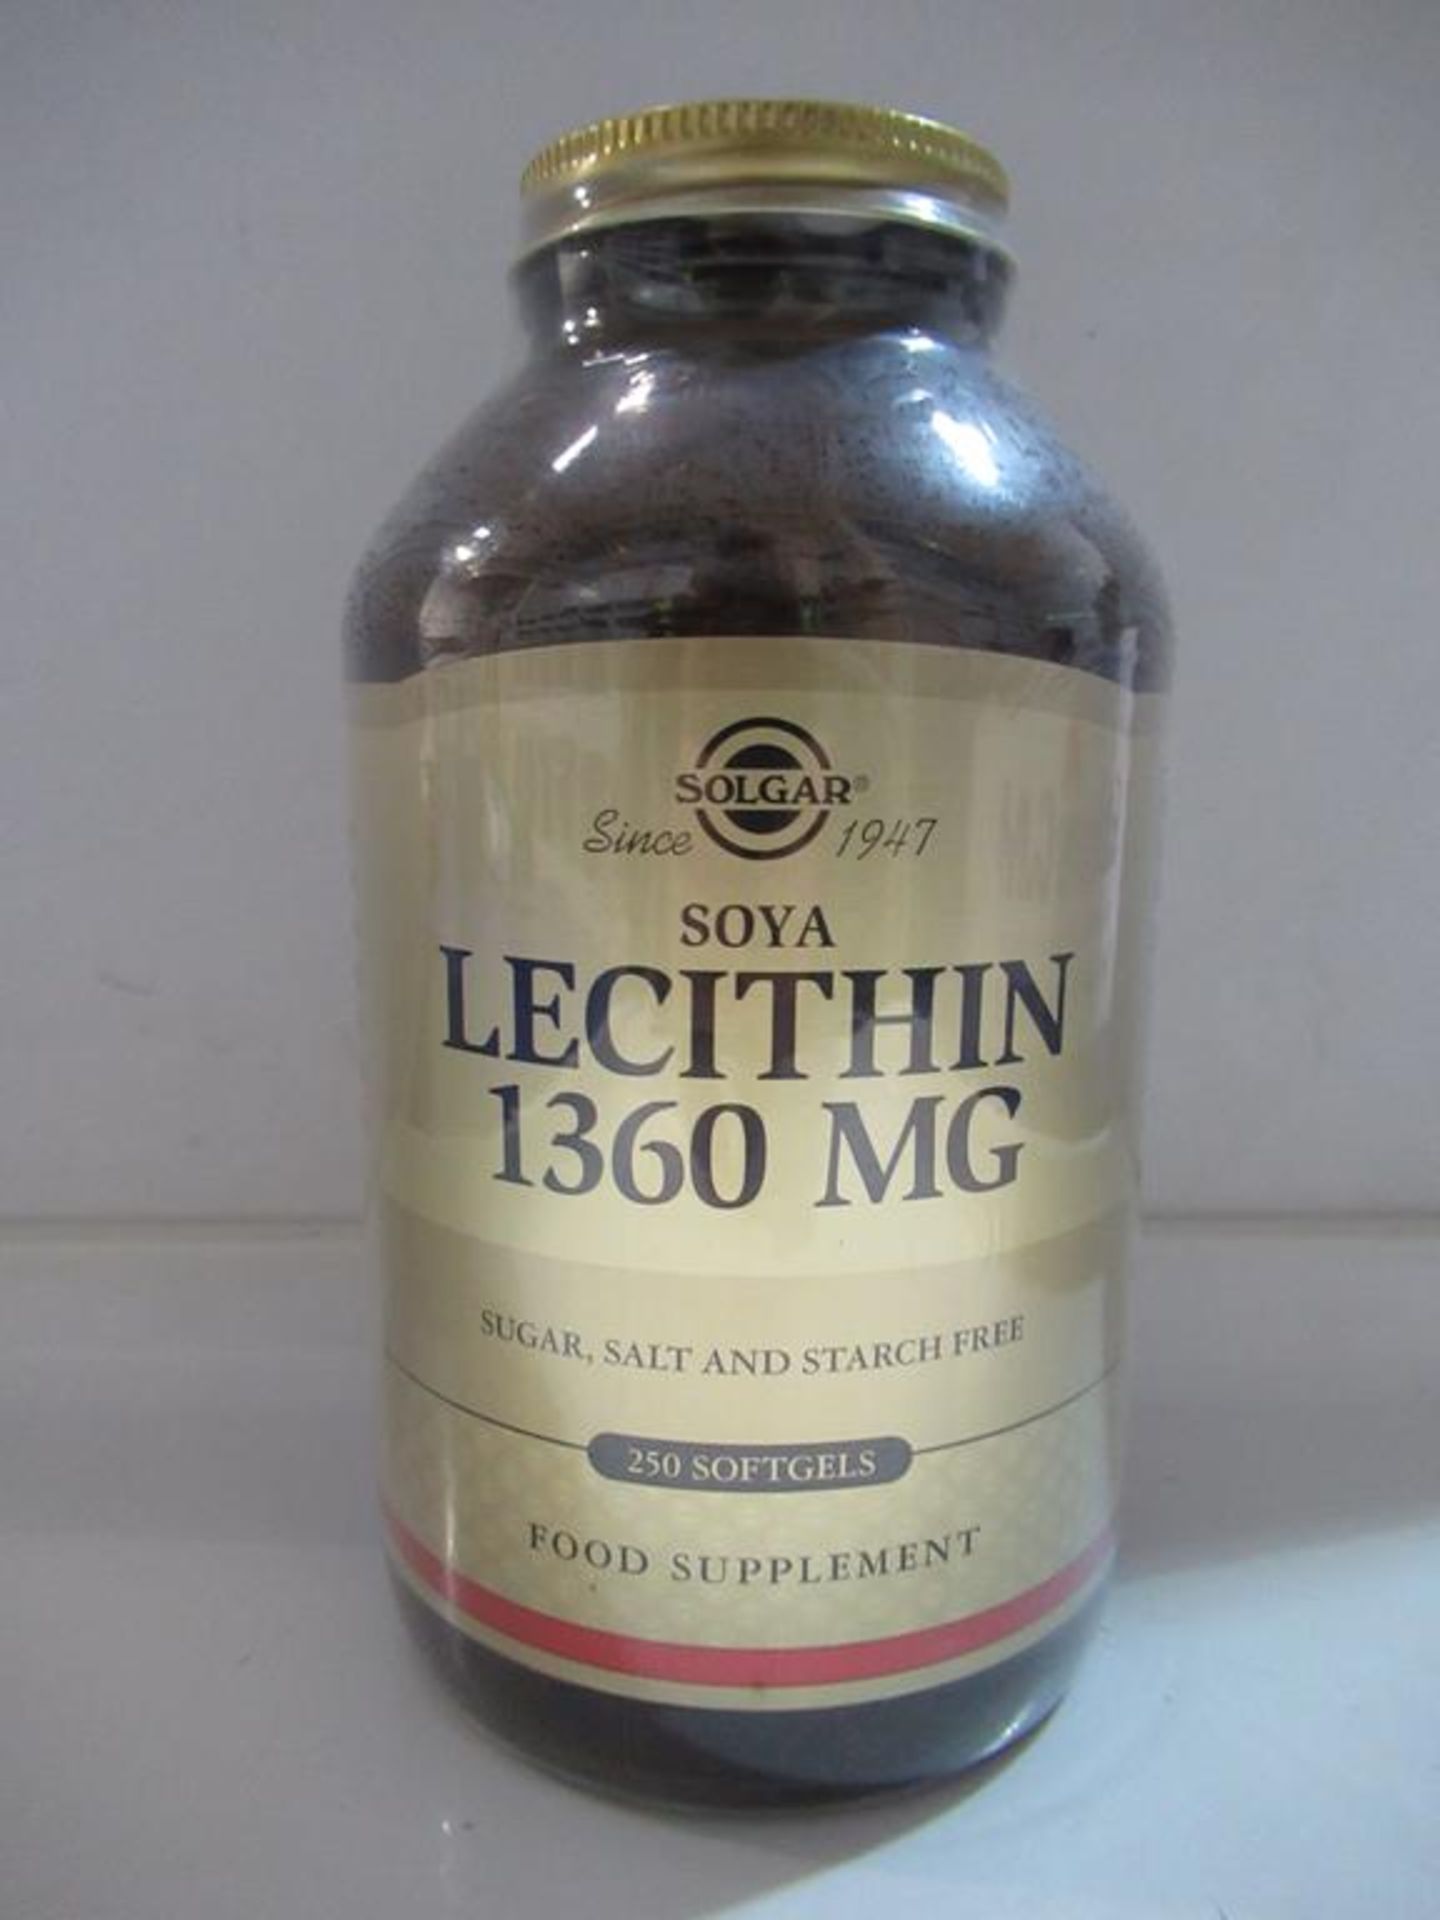 12 x supplement capsules/tablets of Lecithin, Calcium Magnesium and Folate - Image 2 of 8